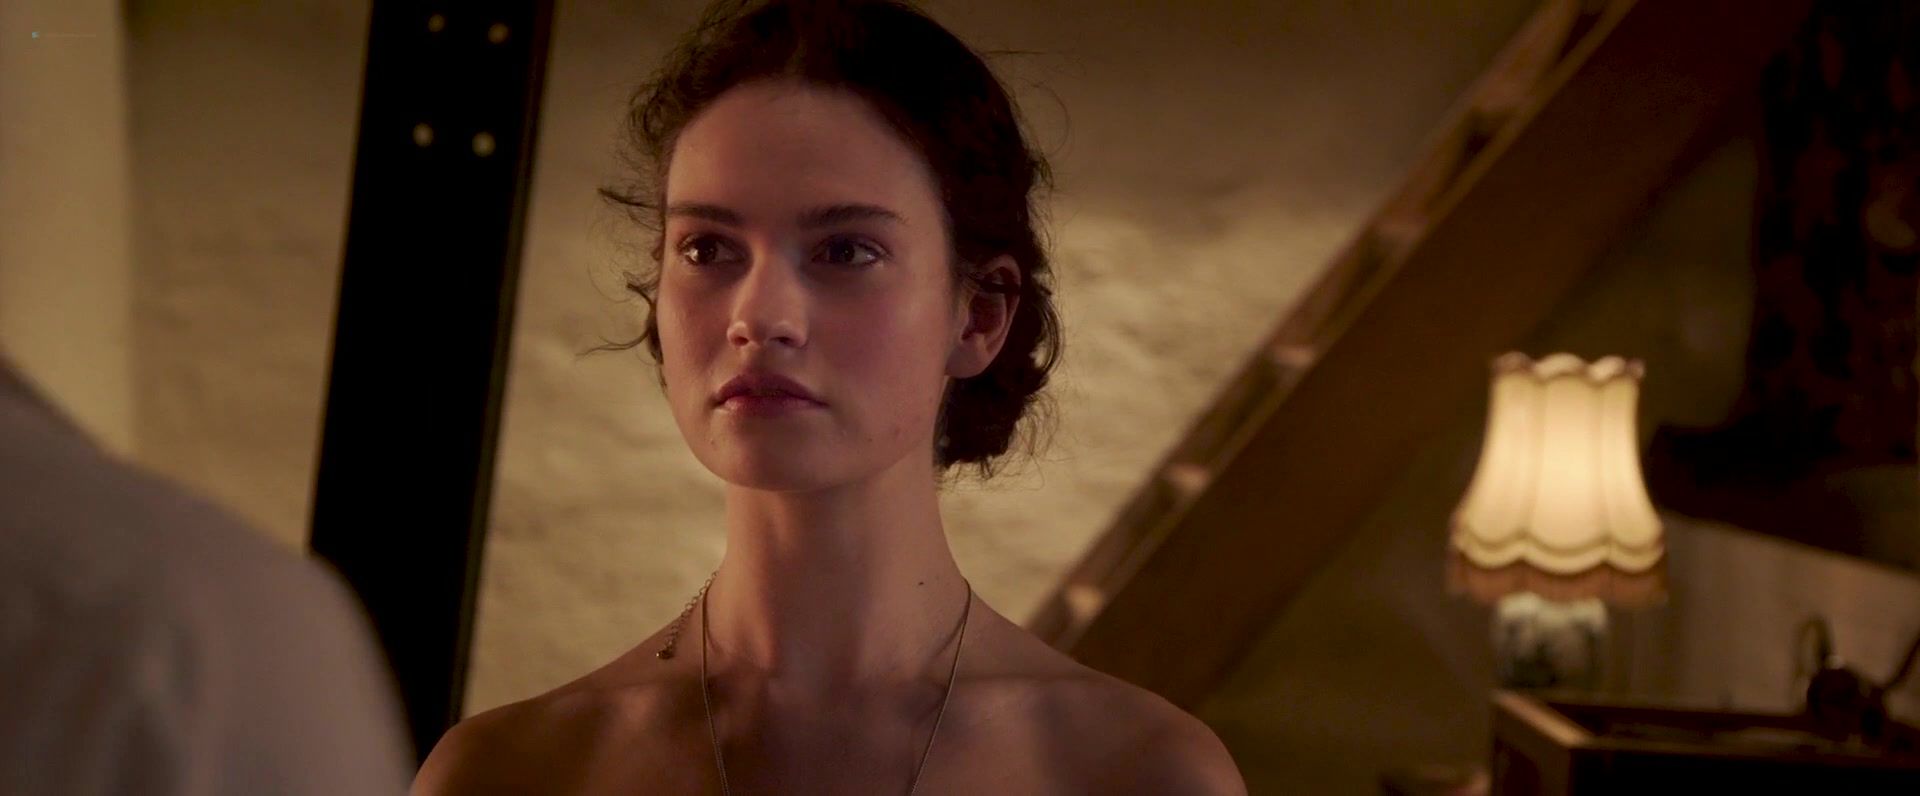 Teenxxx Lily James nude - The Exception (2016) Cunnilingus - 1